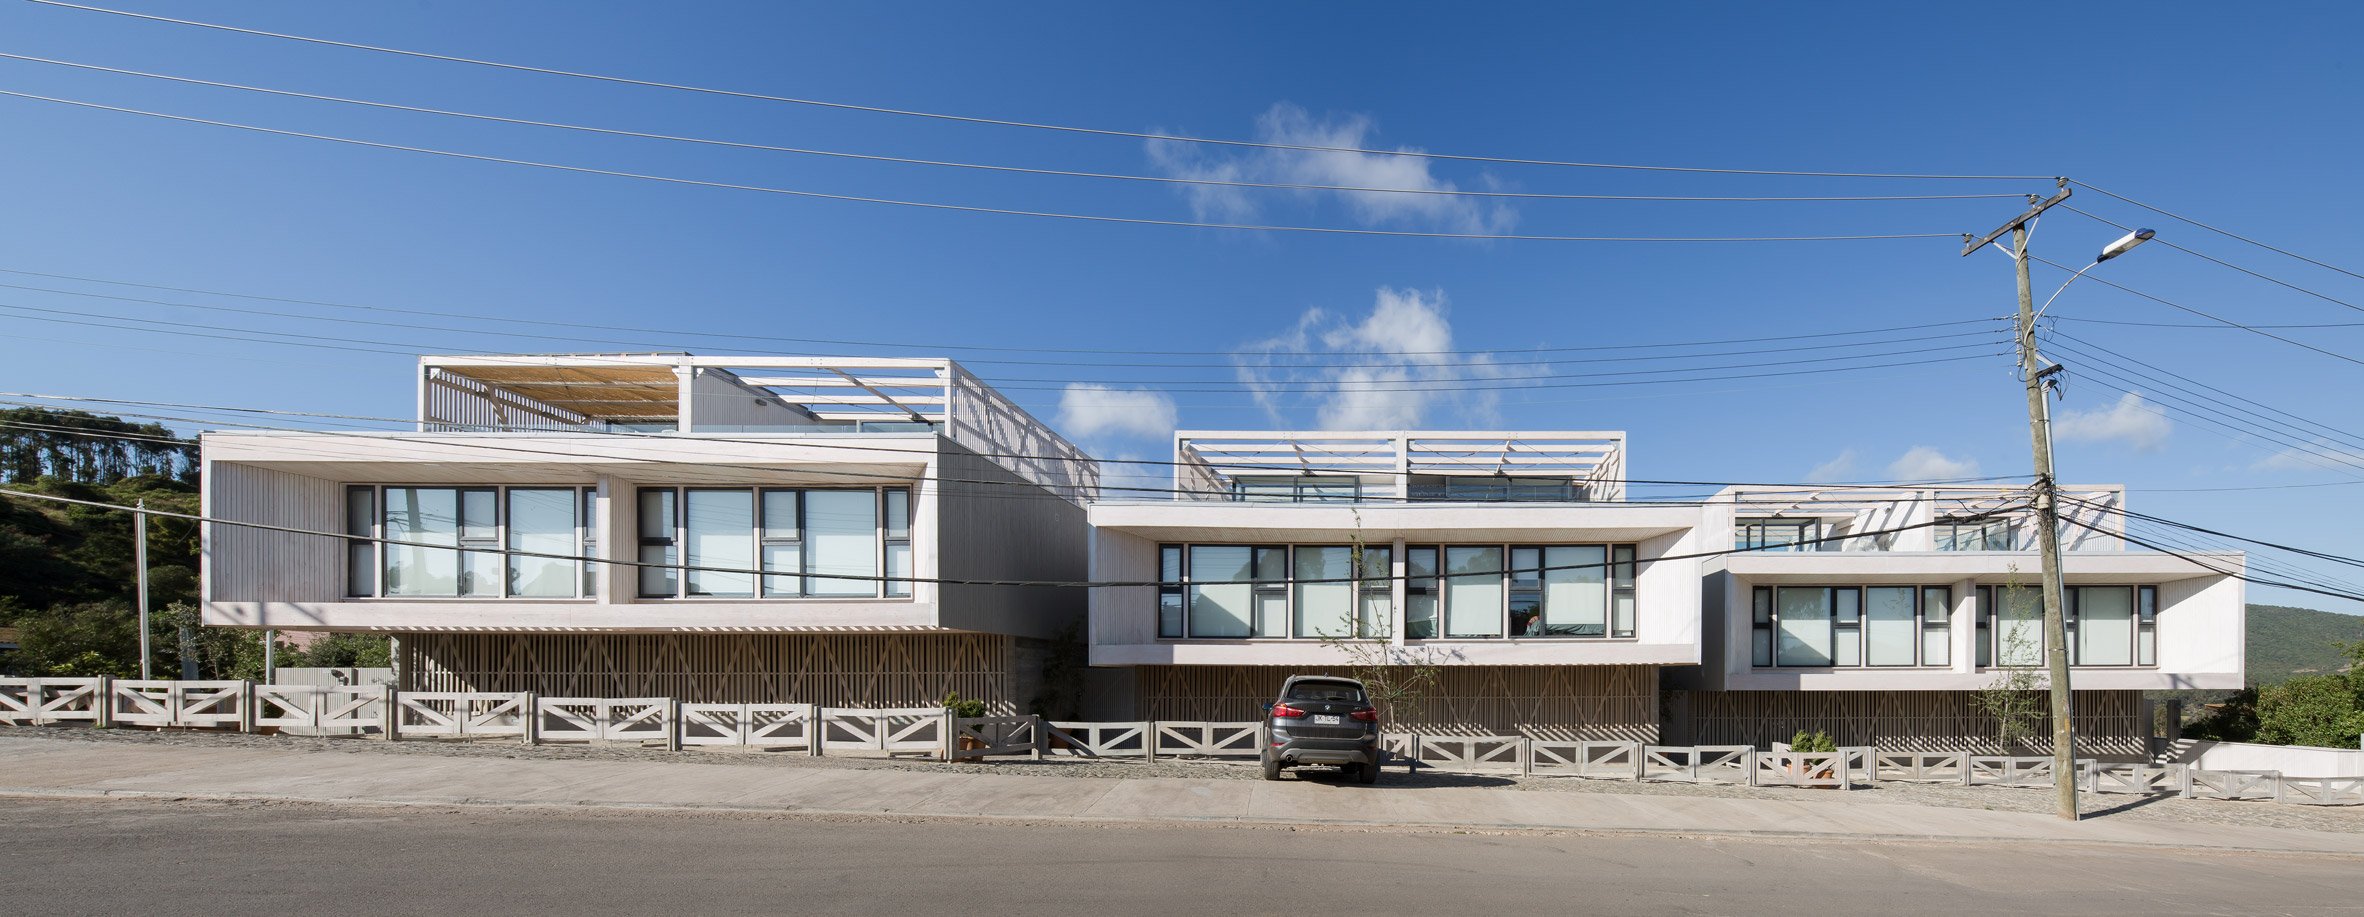 Mobil Arquitectos creates pine-clad holiday dwellings for seaside town in Chile